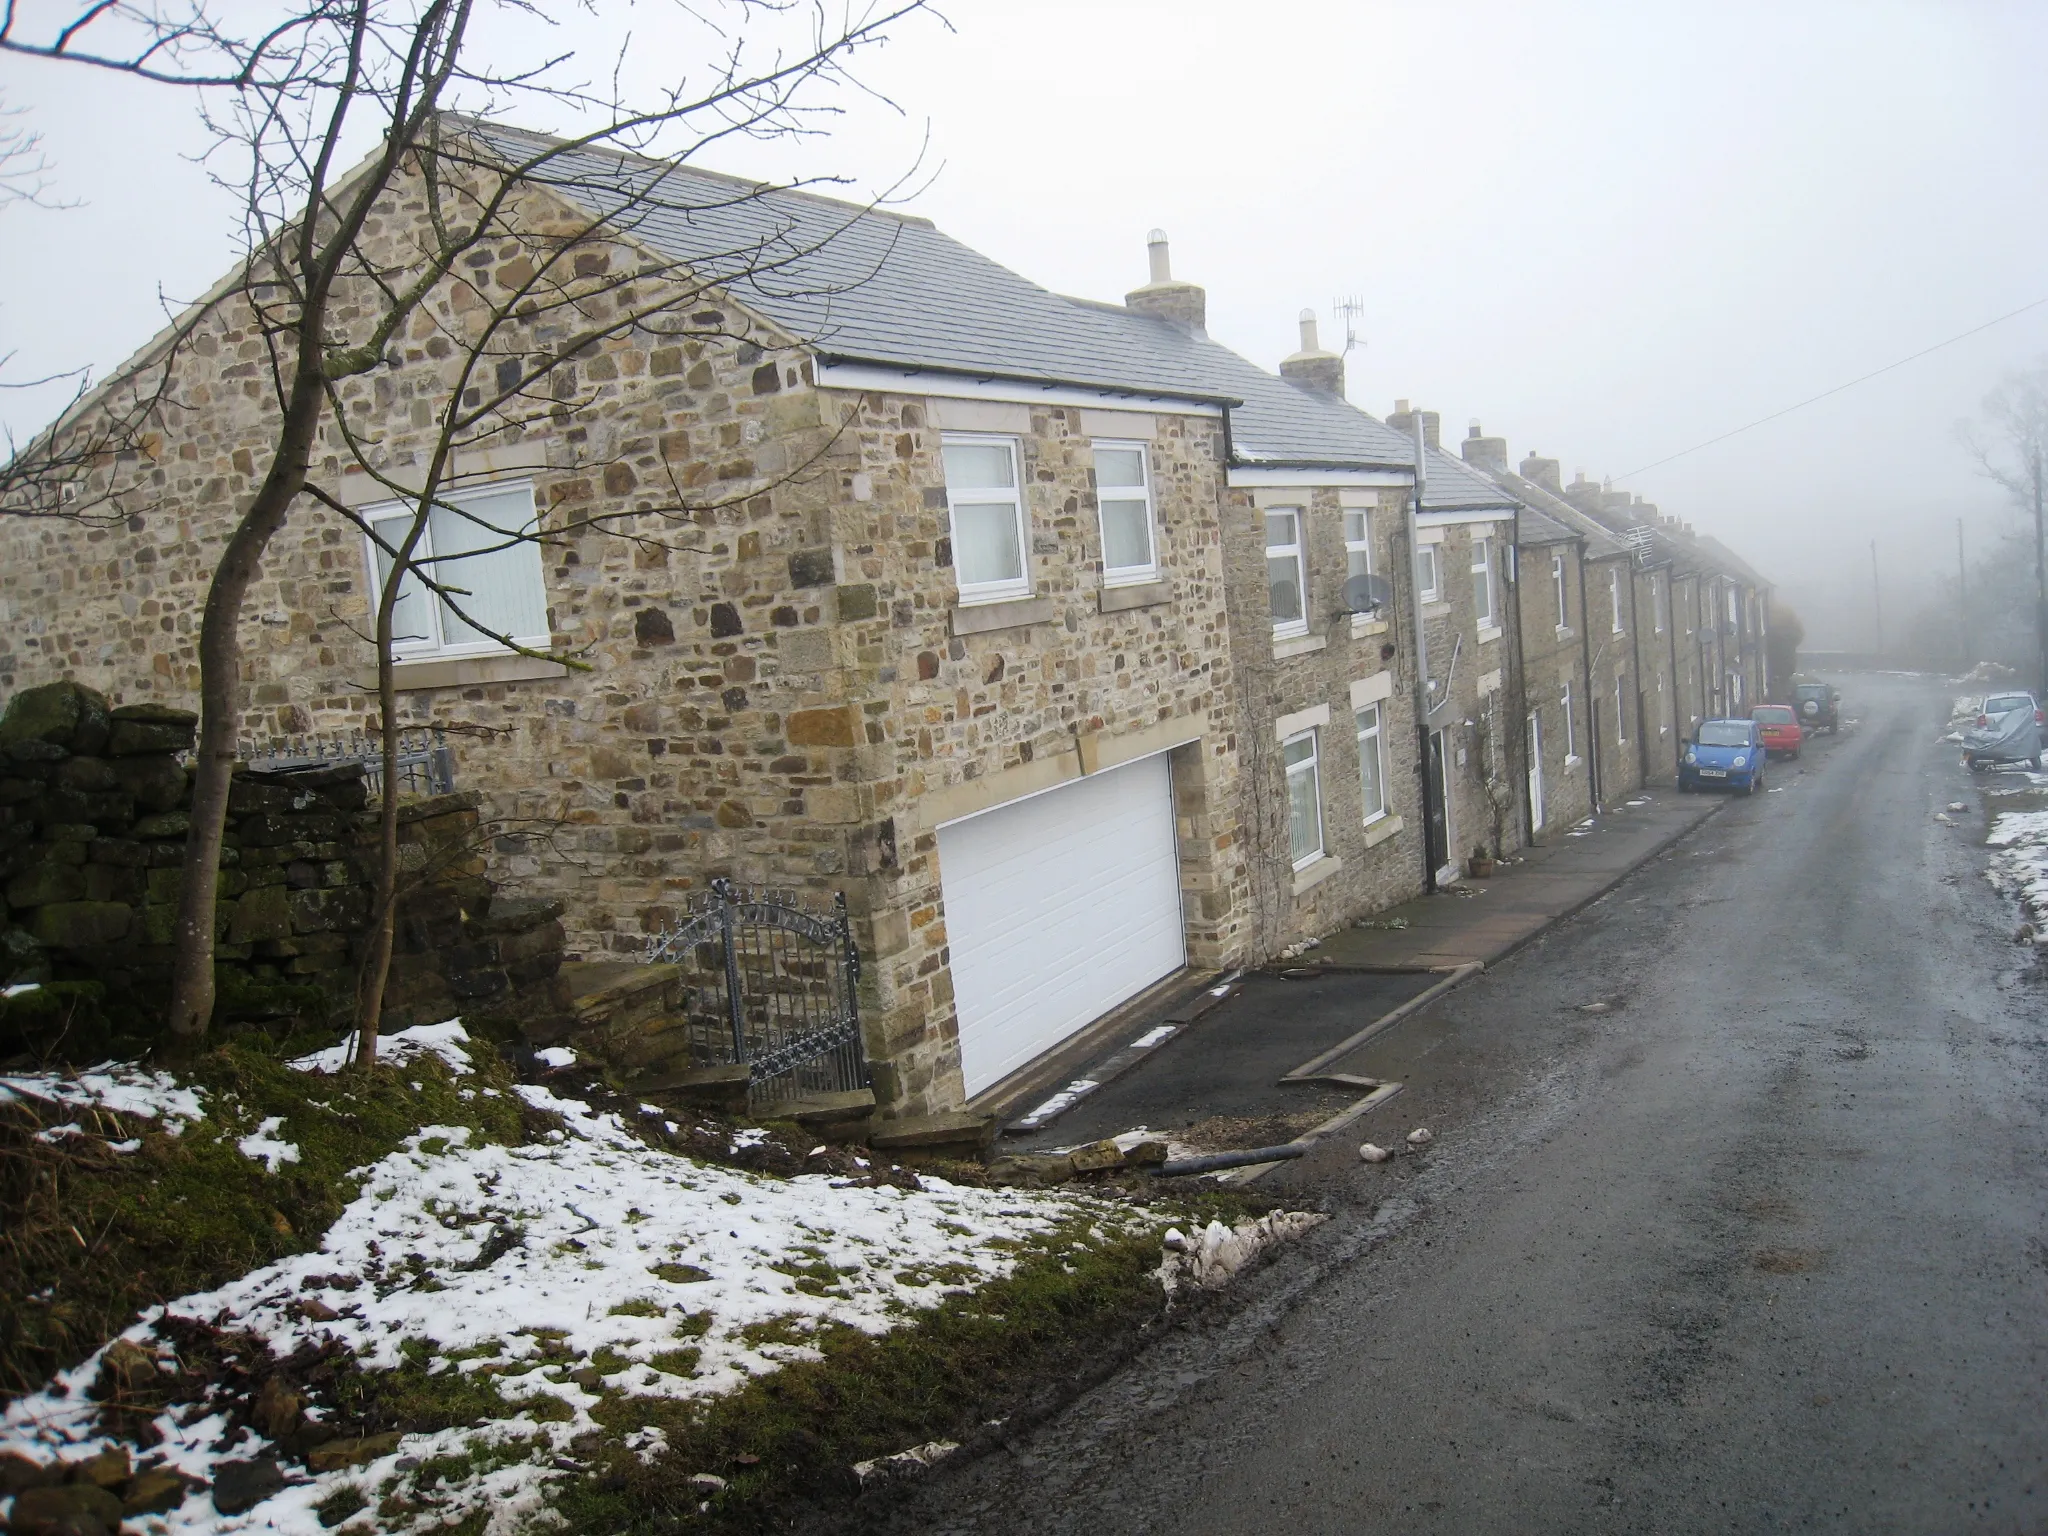 Photo showing: Houses in White Kirkley This photograph shows a view of some of the houses on the downhill section of the road through White Kirkley. The picture was taken on a misty day in late February looking in a northerly direction towards Frosterly.